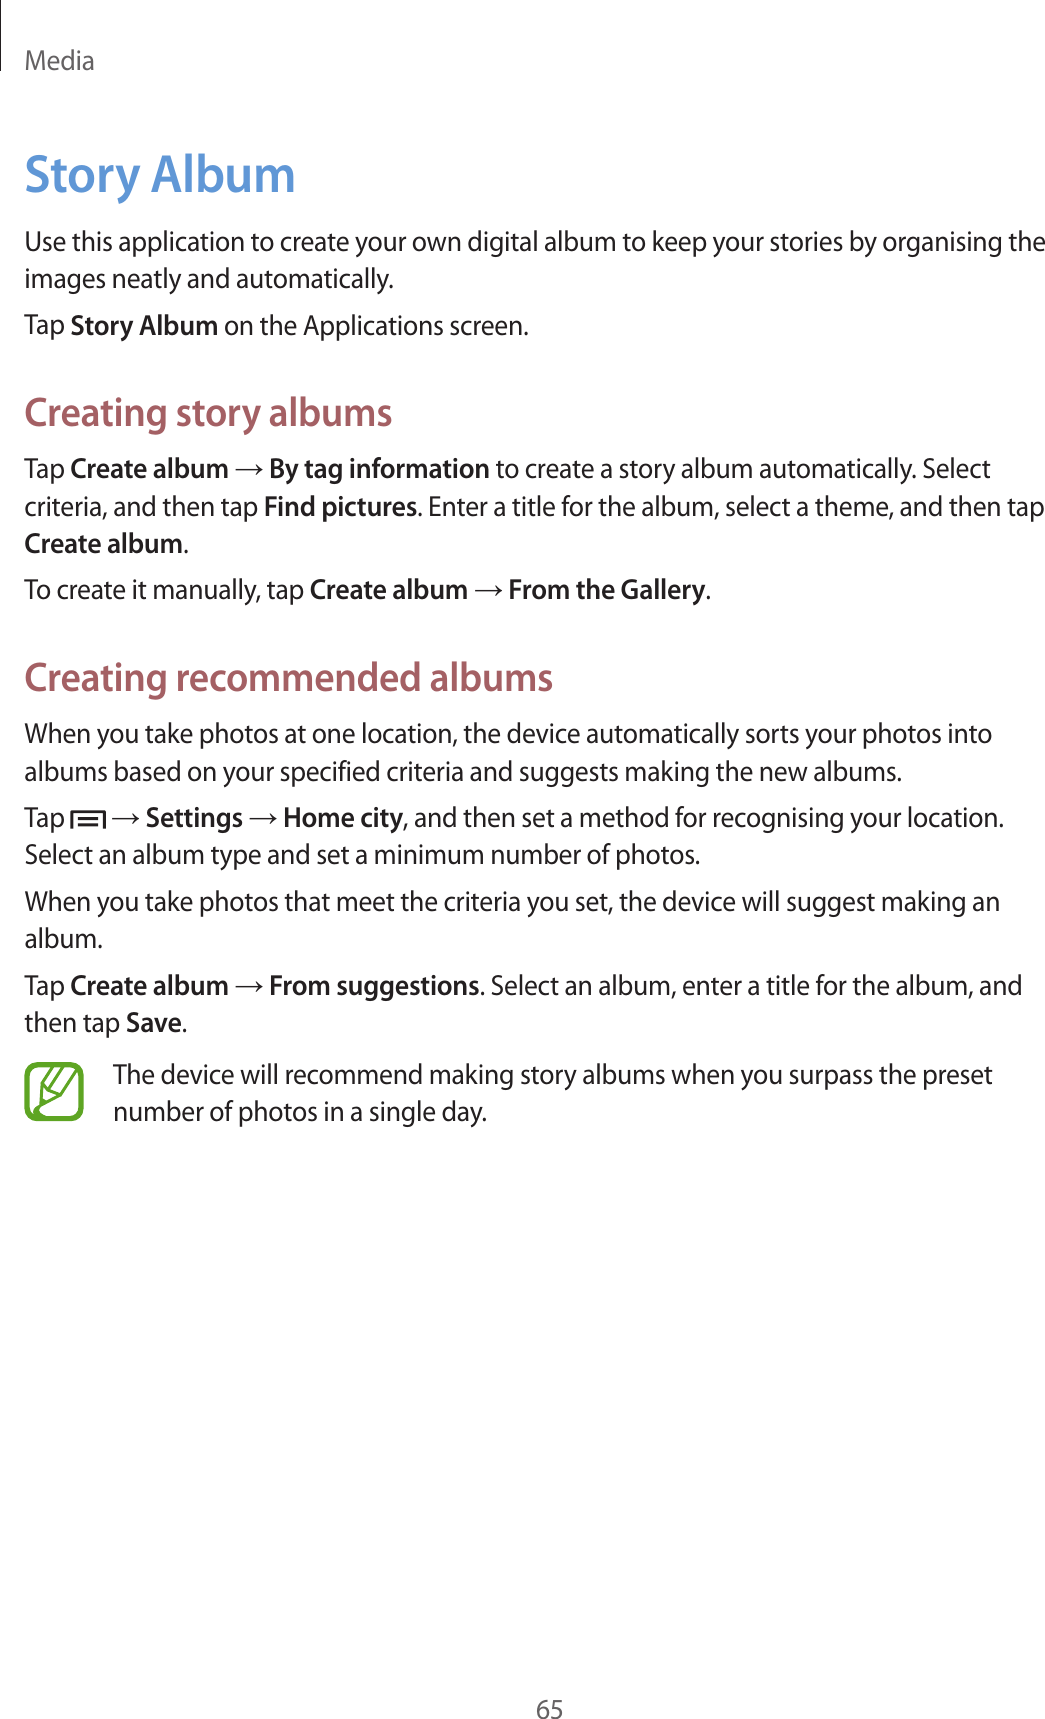 Media65Story AlbumUse this application to create your own digital album to keep your stories by organising the images neatly and automatically.Tap Story Album on the Applications screen.Creating story albumsTap Create album → By tag information to create a story album automatically. Select criteria, and then tap Find pictures. Enter a title for the album, select a theme, and then tap Create album.To create it manually, tap Create album → From the Gallery.Creating recommended albumsWhen you take photos at one location, the device automatically sorts your photos into albums based on your specified criteria and suggests making the new albums.Tap   → Settings → Home city, and then set a method for recognising your location. Select an album type and set a minimum number of photos.When you take photos that meet the criteria you set, the device will suggest making an album.Tap Create album → From suggestions. Select an album, enter a title for the album, and then tap Save.The device will recommend making story albums when you surpass the preset number of photos in a single day.